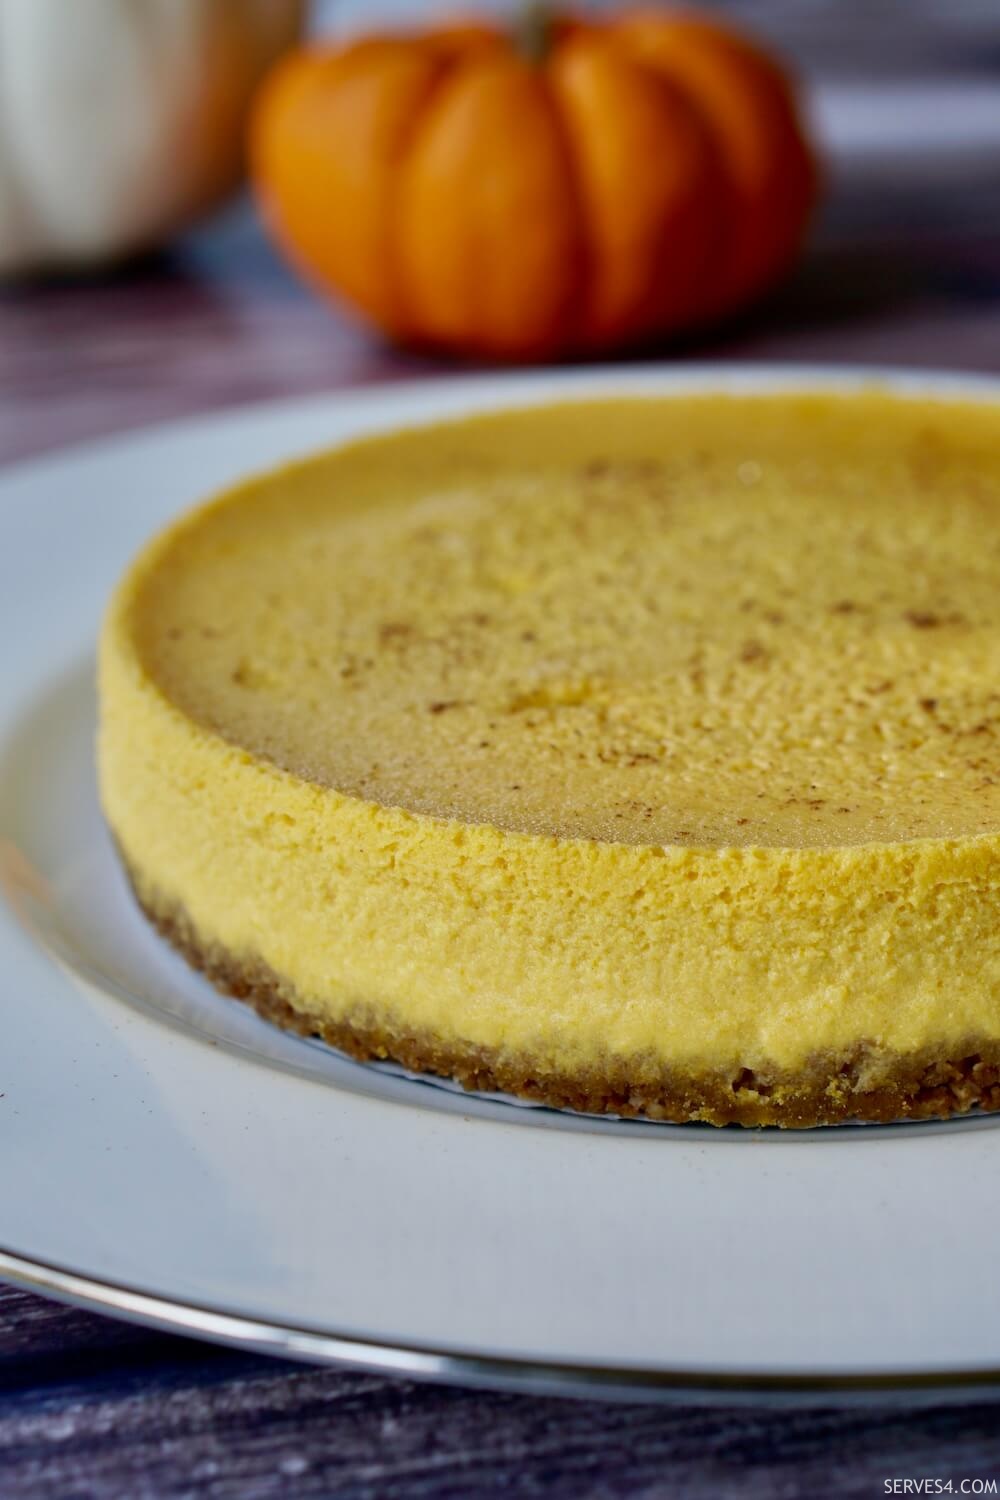 This mini pumpkin cheesecake recipe is light and fluffy and tastes of actual pumpkin flavour, you won't be able to stop at one slice!